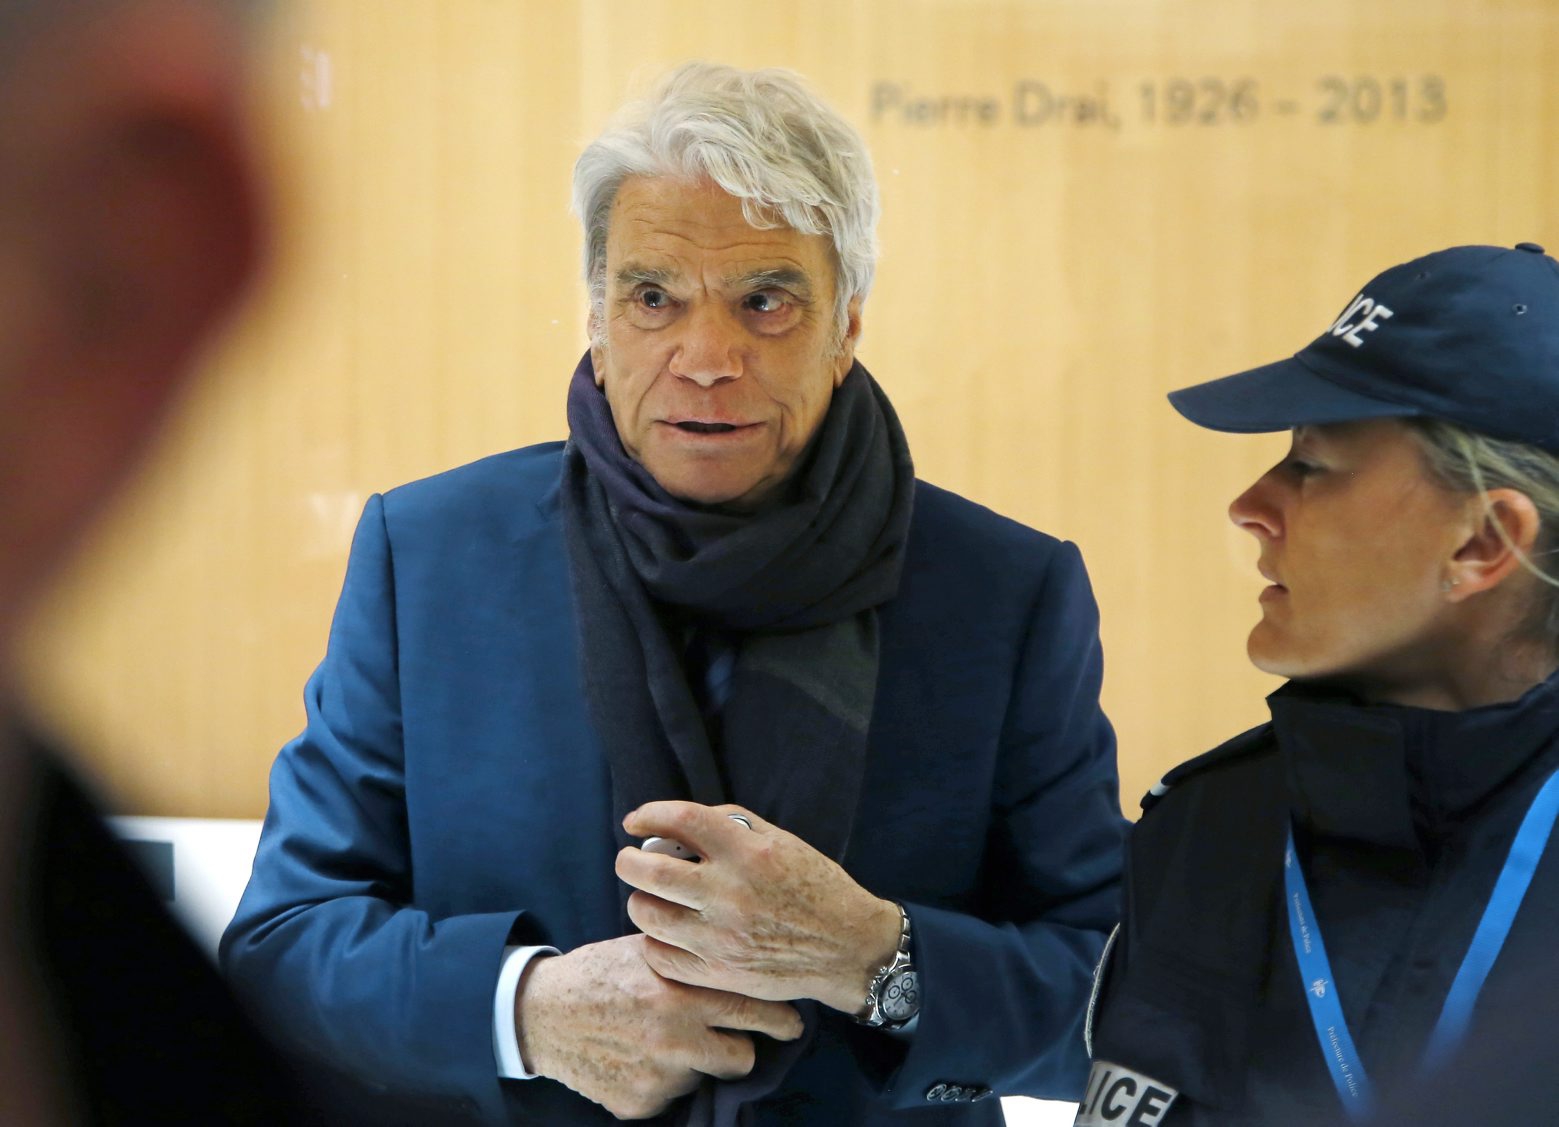 FILE - In this March 13, 2019 file photo, French tycoon Bernard Tapie arrives at Paris court house. A court has acquitted Tuesday July 9, 2019 Bernard Tapie of fraud over a 404 million-euro ($452.5 million at the current exchange rate) payment linked to the sale of sportswear company Adidas in the 1990s. (AP Photos/Michel Euler, File)
Bernard Tapie France Fraud Trial